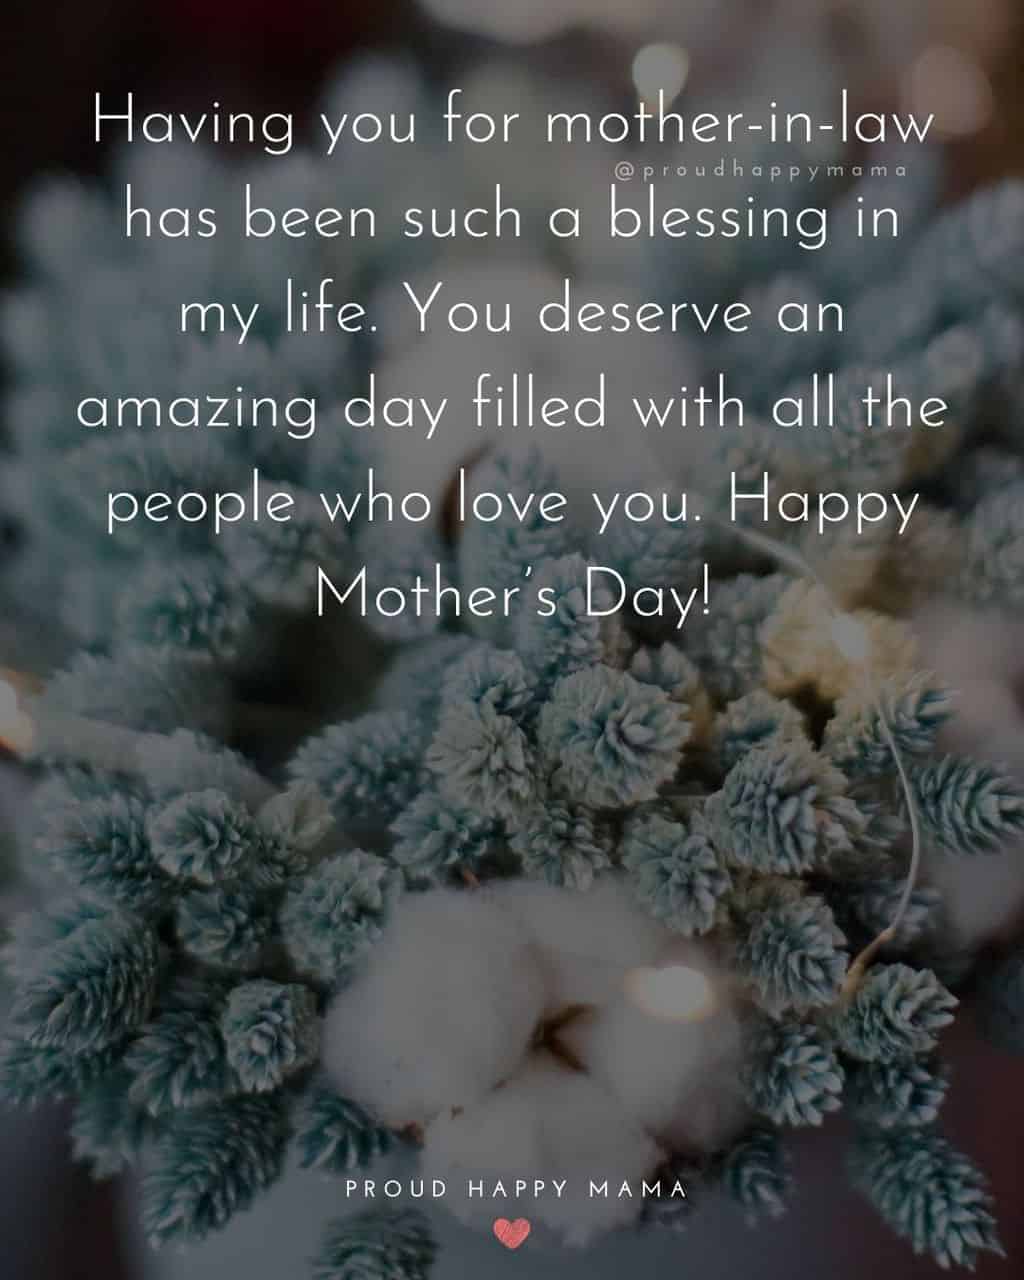 Happy Mothers Day Quotes For Mother In Law - Having you for mother in law has been such a blessing in my life. You deserve an